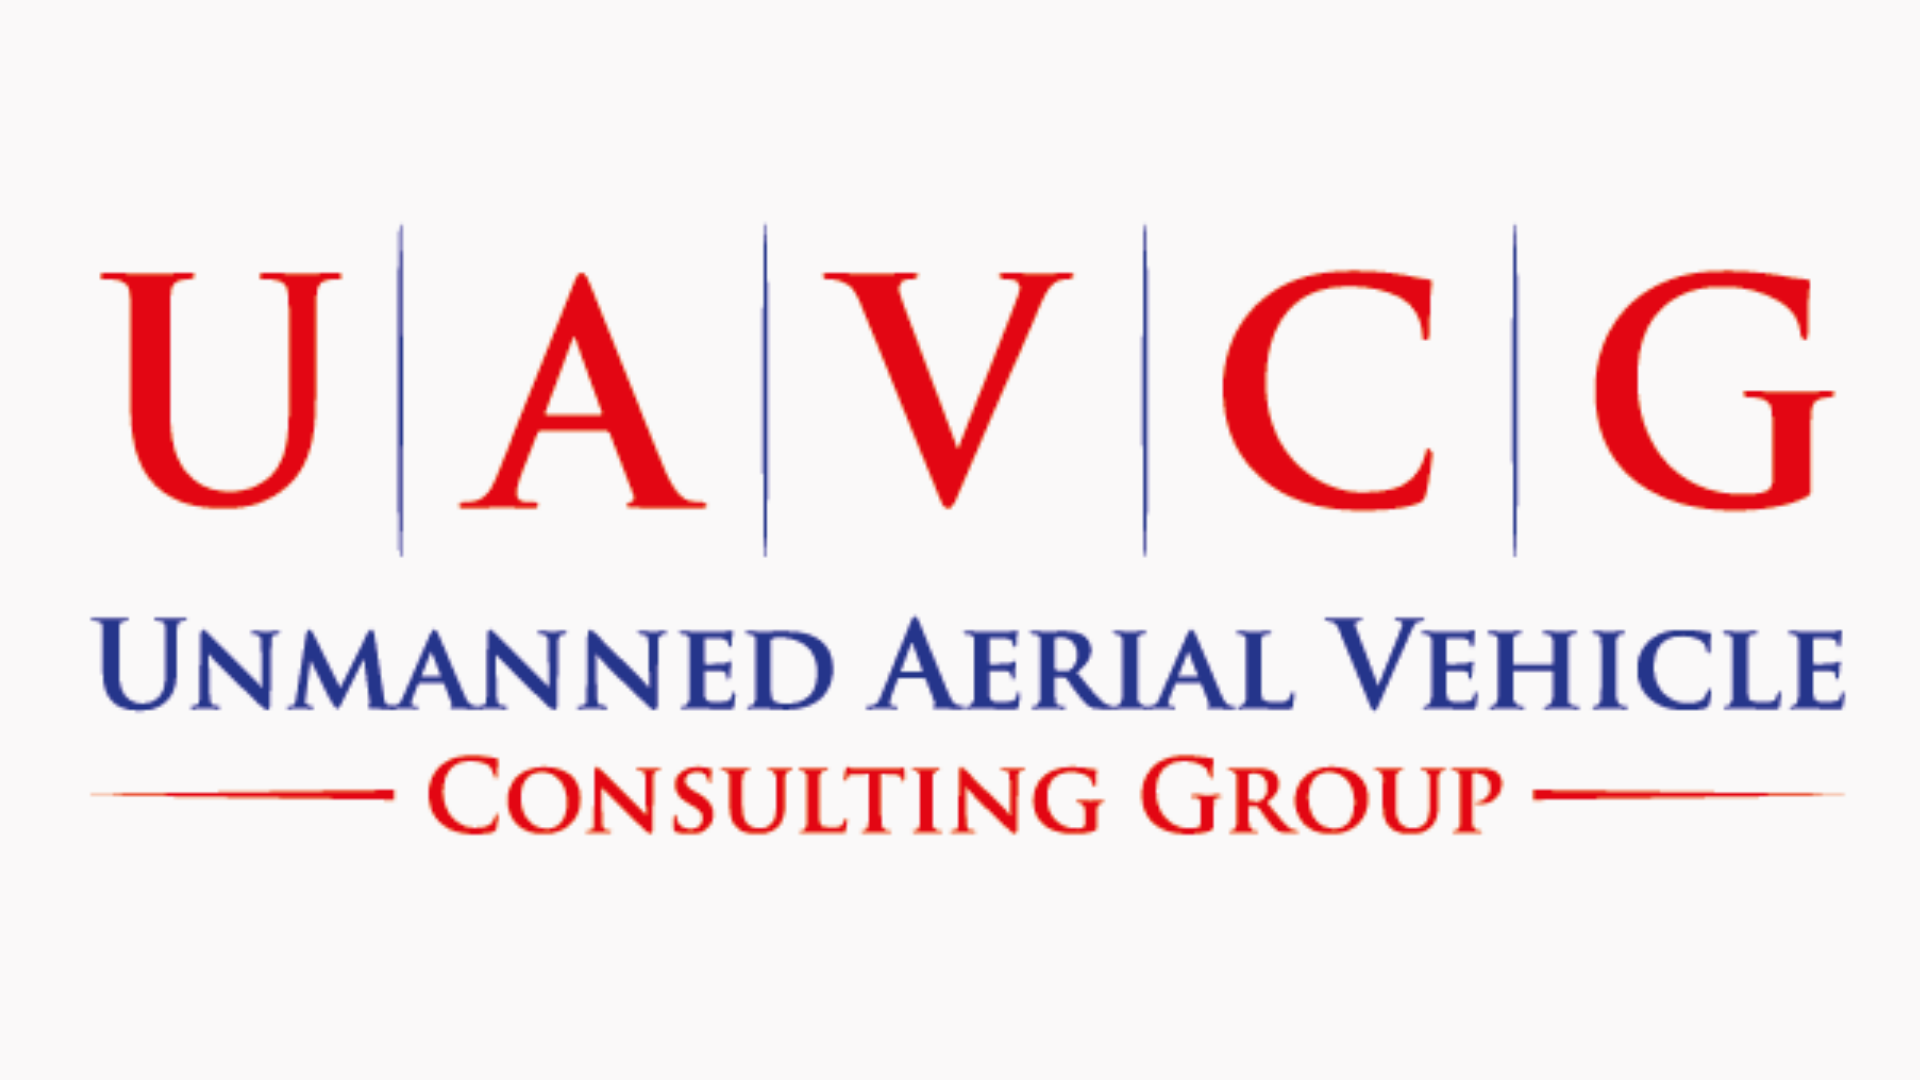 UAVCG Consulting Group